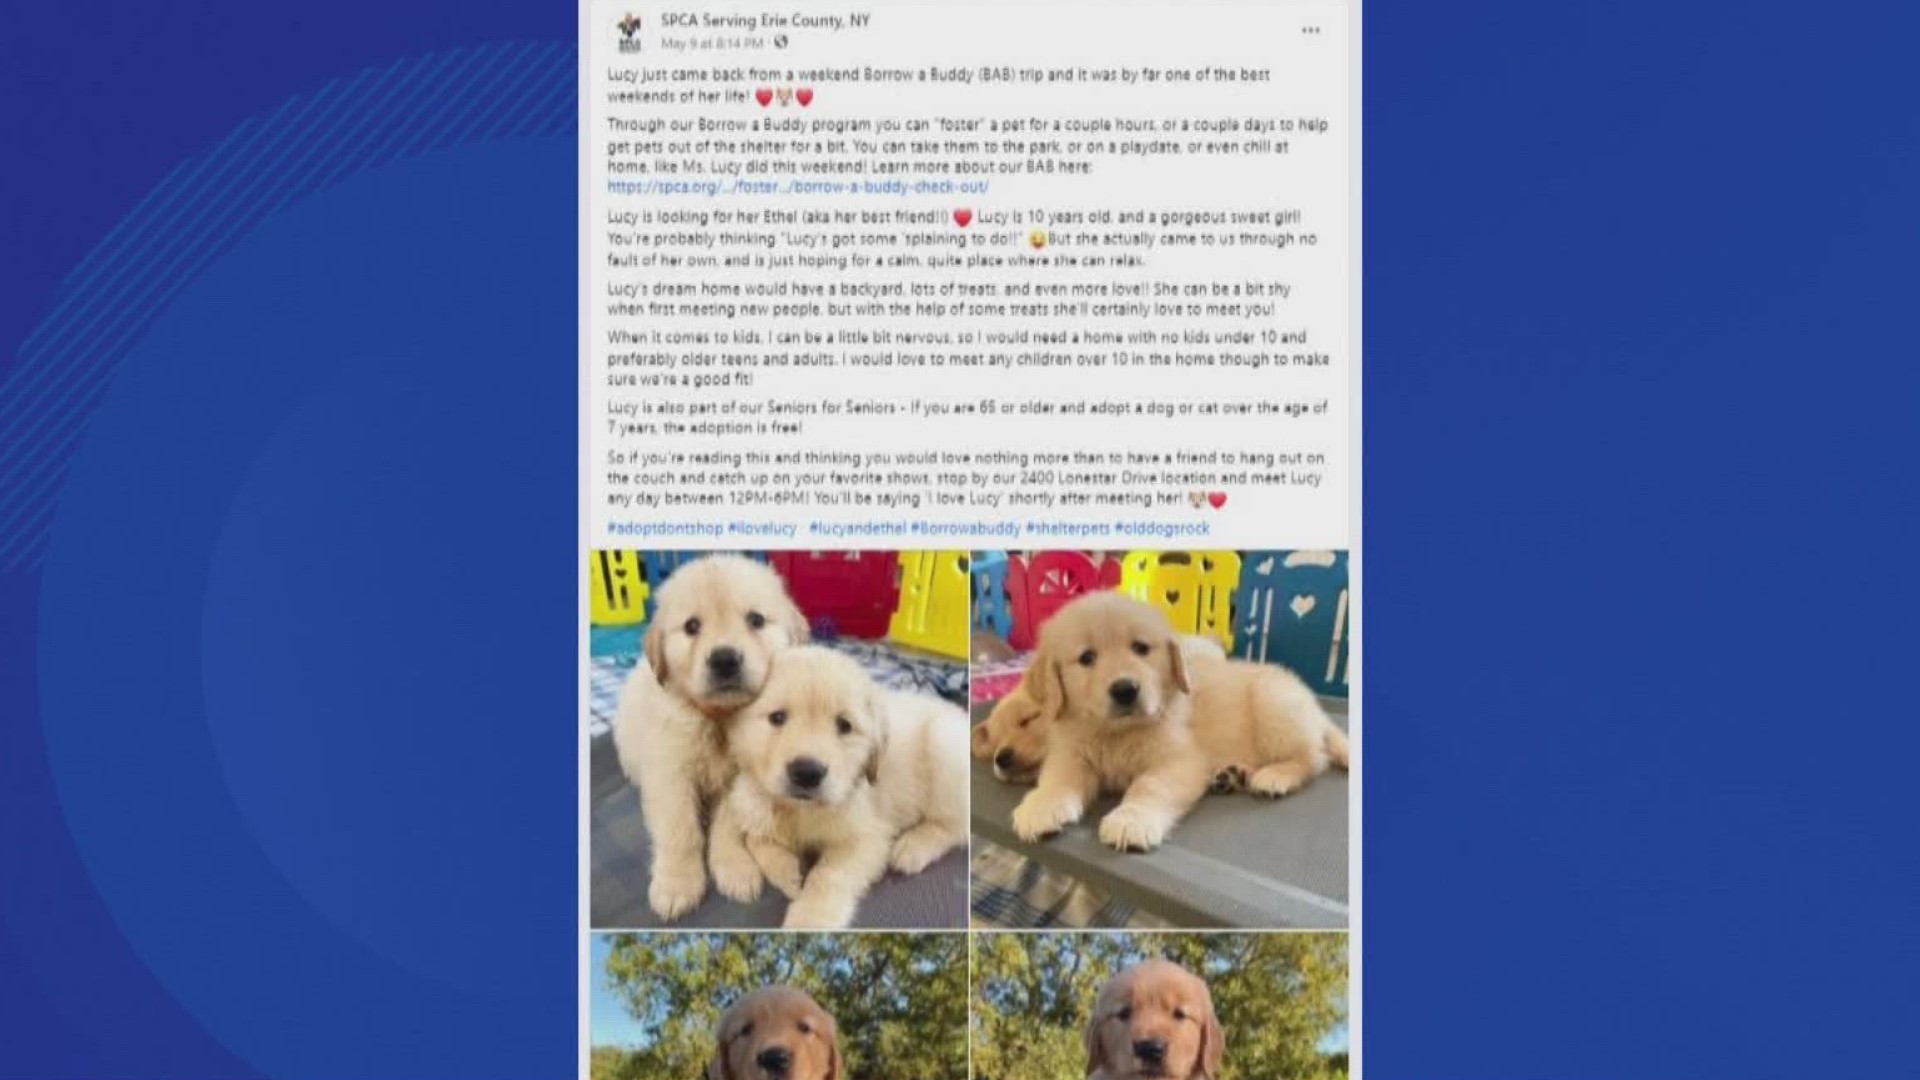 The SPCA Serving Erie County is warning people of a puppy scam. In fact, it involves a fake Facebook page that's claiming to be a nonprofit organization.